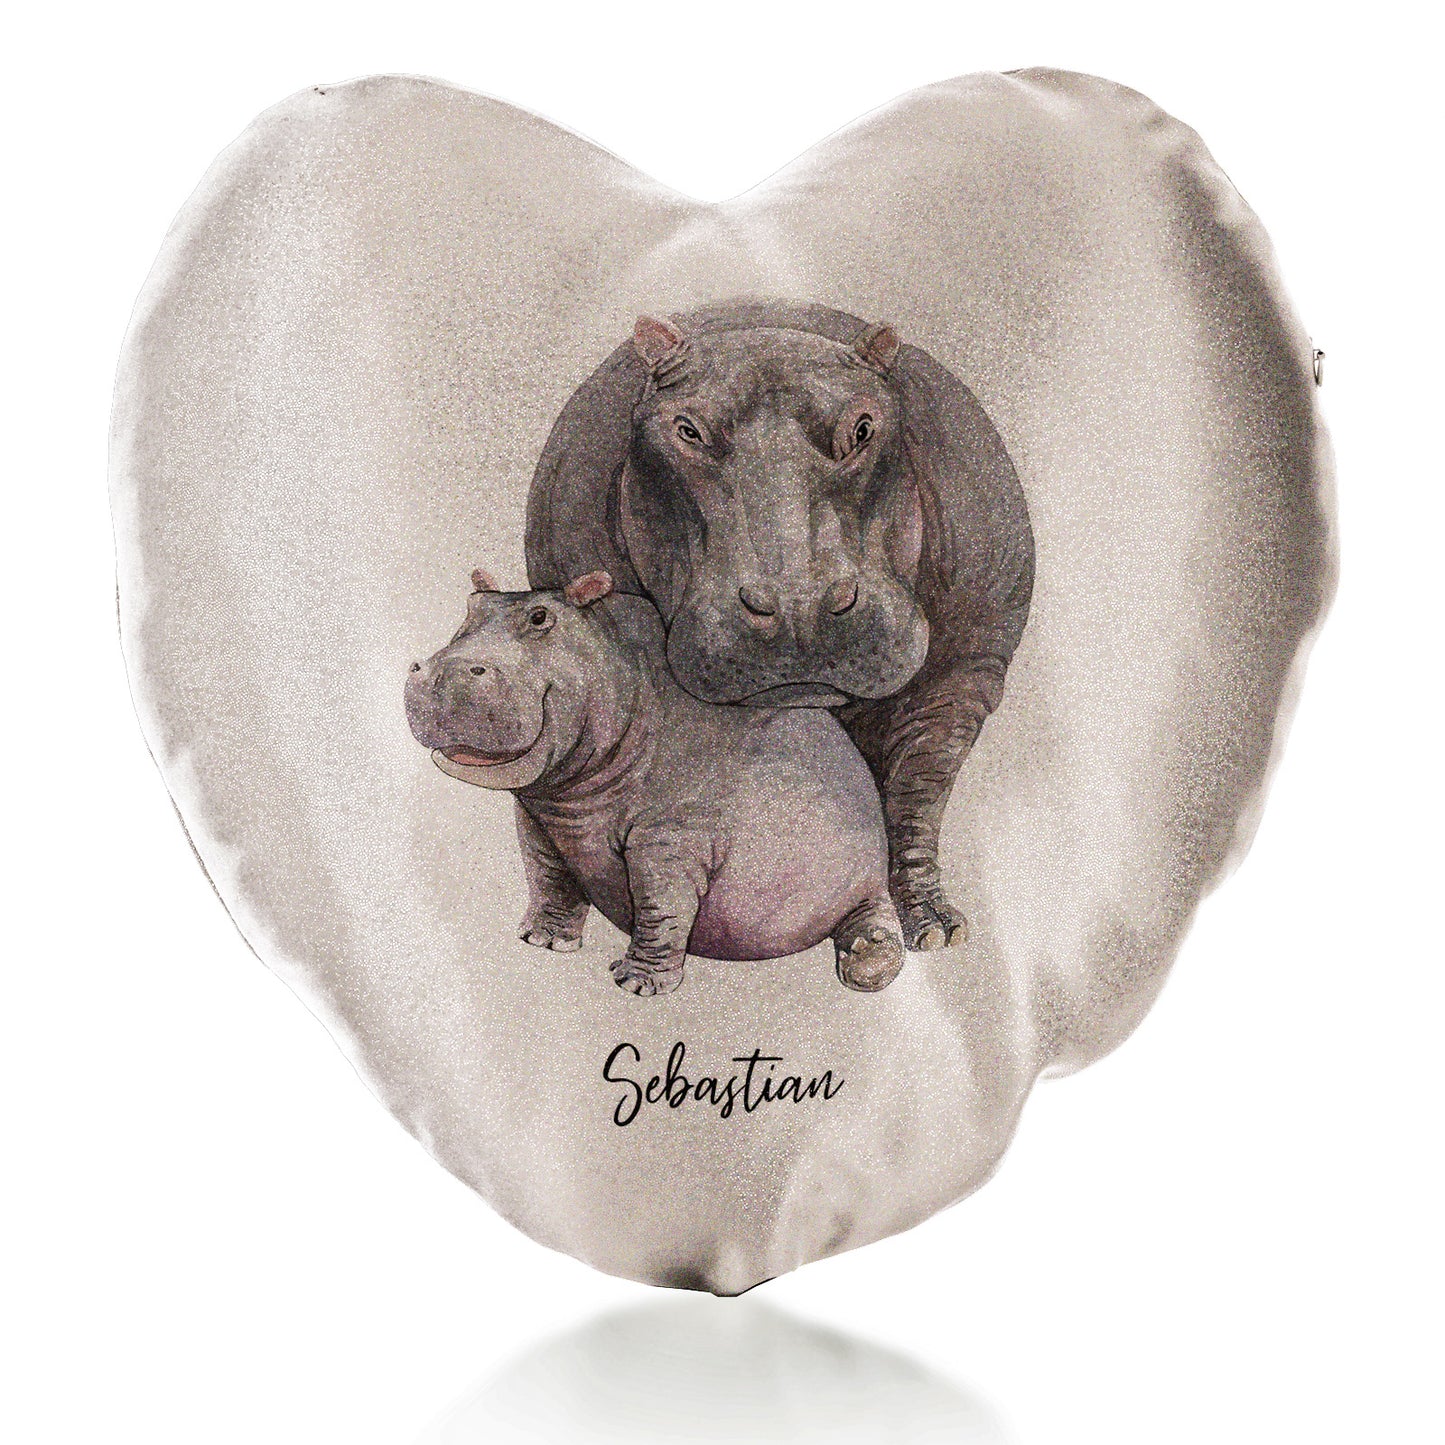 Personalised Glitter Heart Cushion with Welcoming Text and Embracing Mum and Baby Hippos